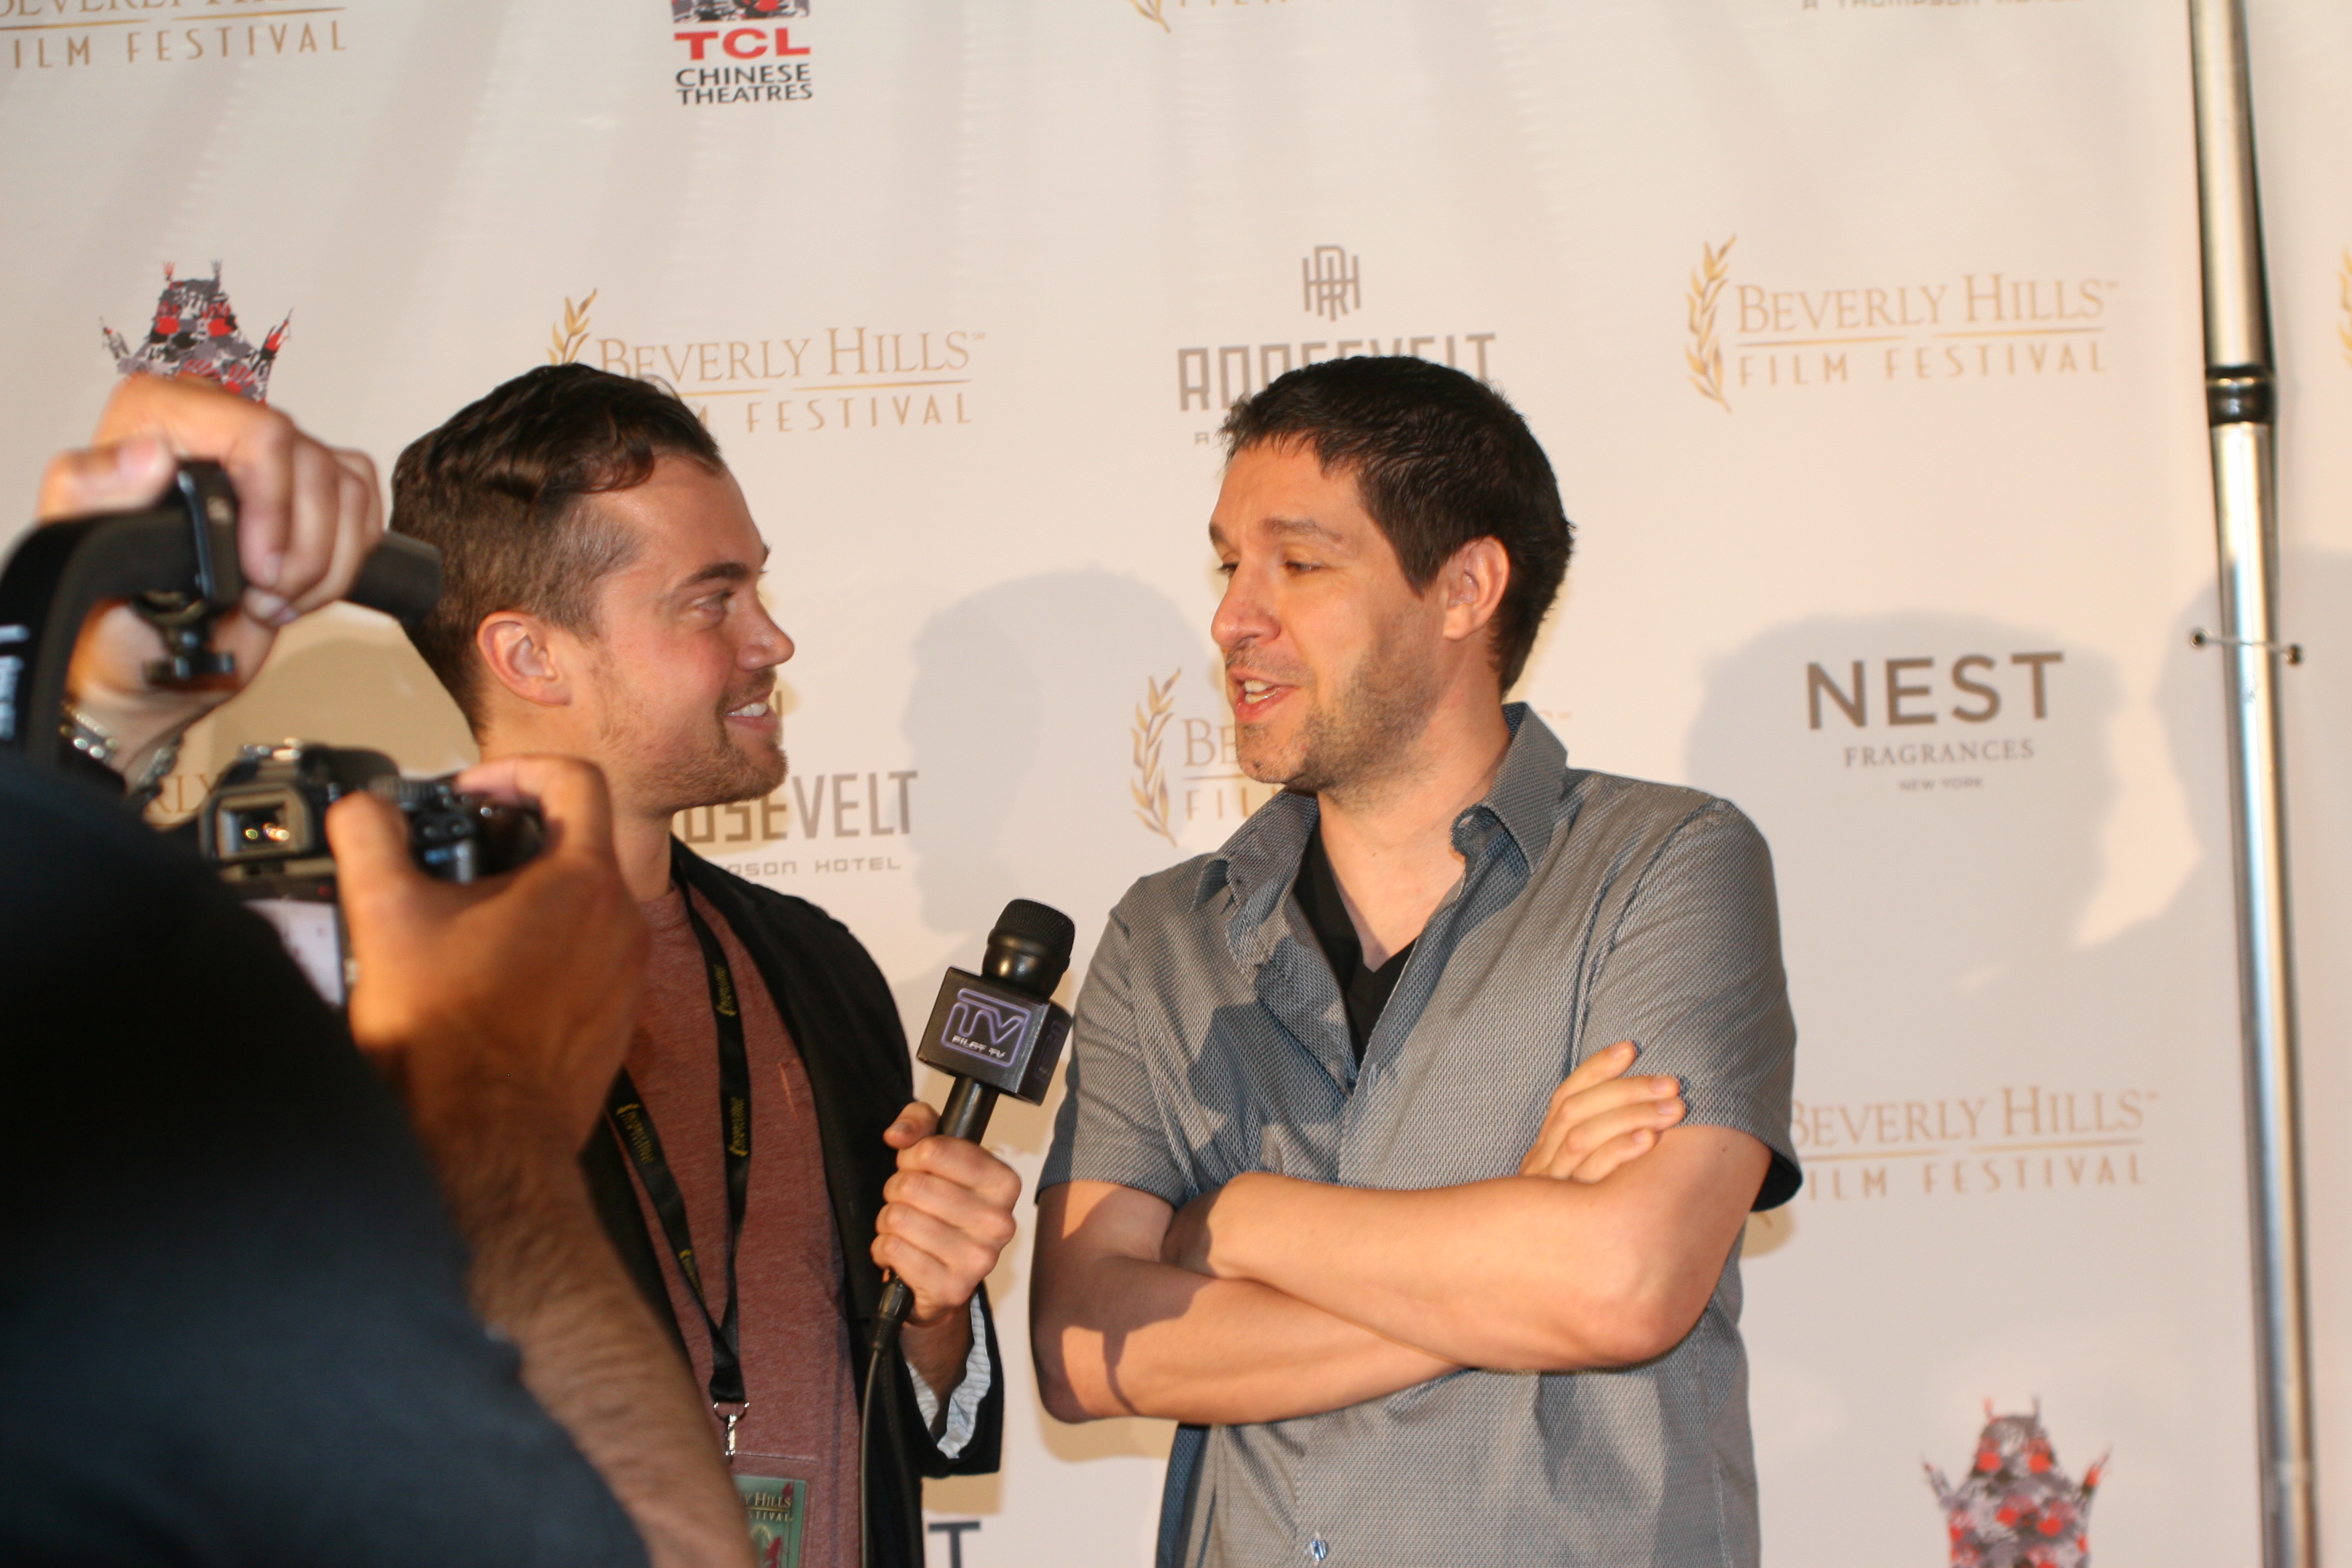 PilotTV interviews Francisco Lorite at The Beverly Hills Film festival